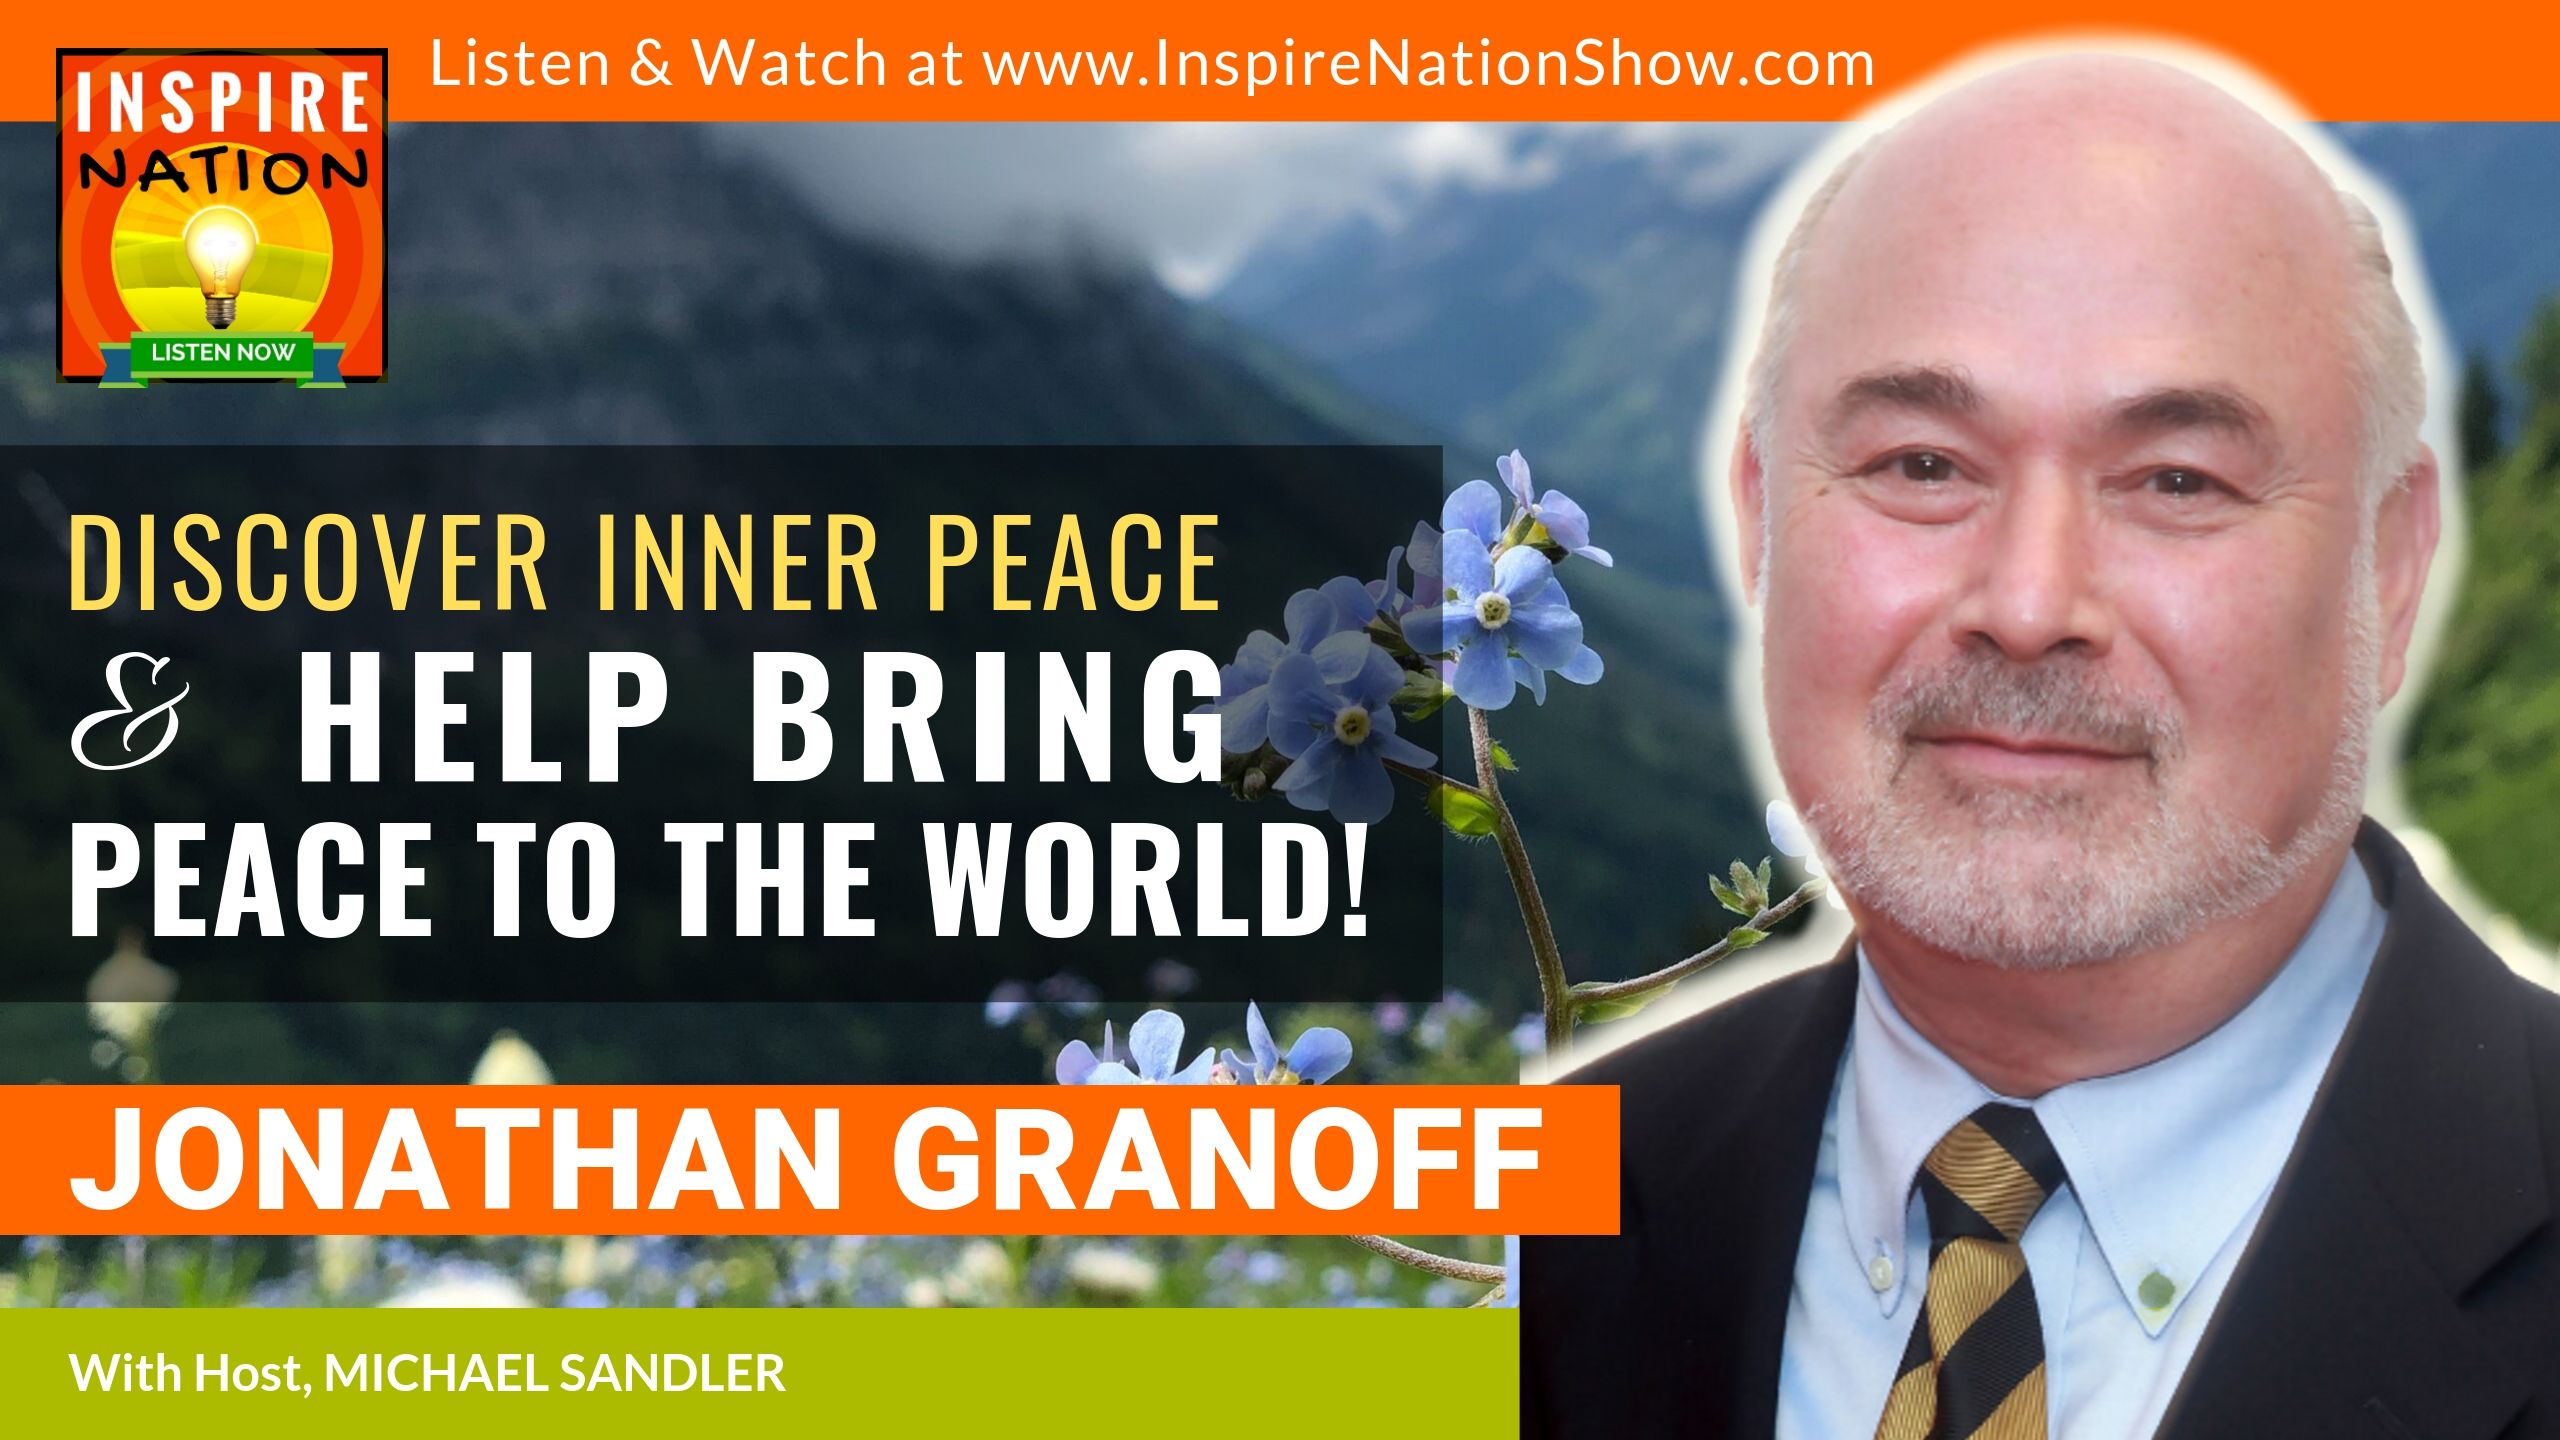 Michael Sandler interviews Jonathan Granoff on how to discover inner peace in order to help bring peace to the world.